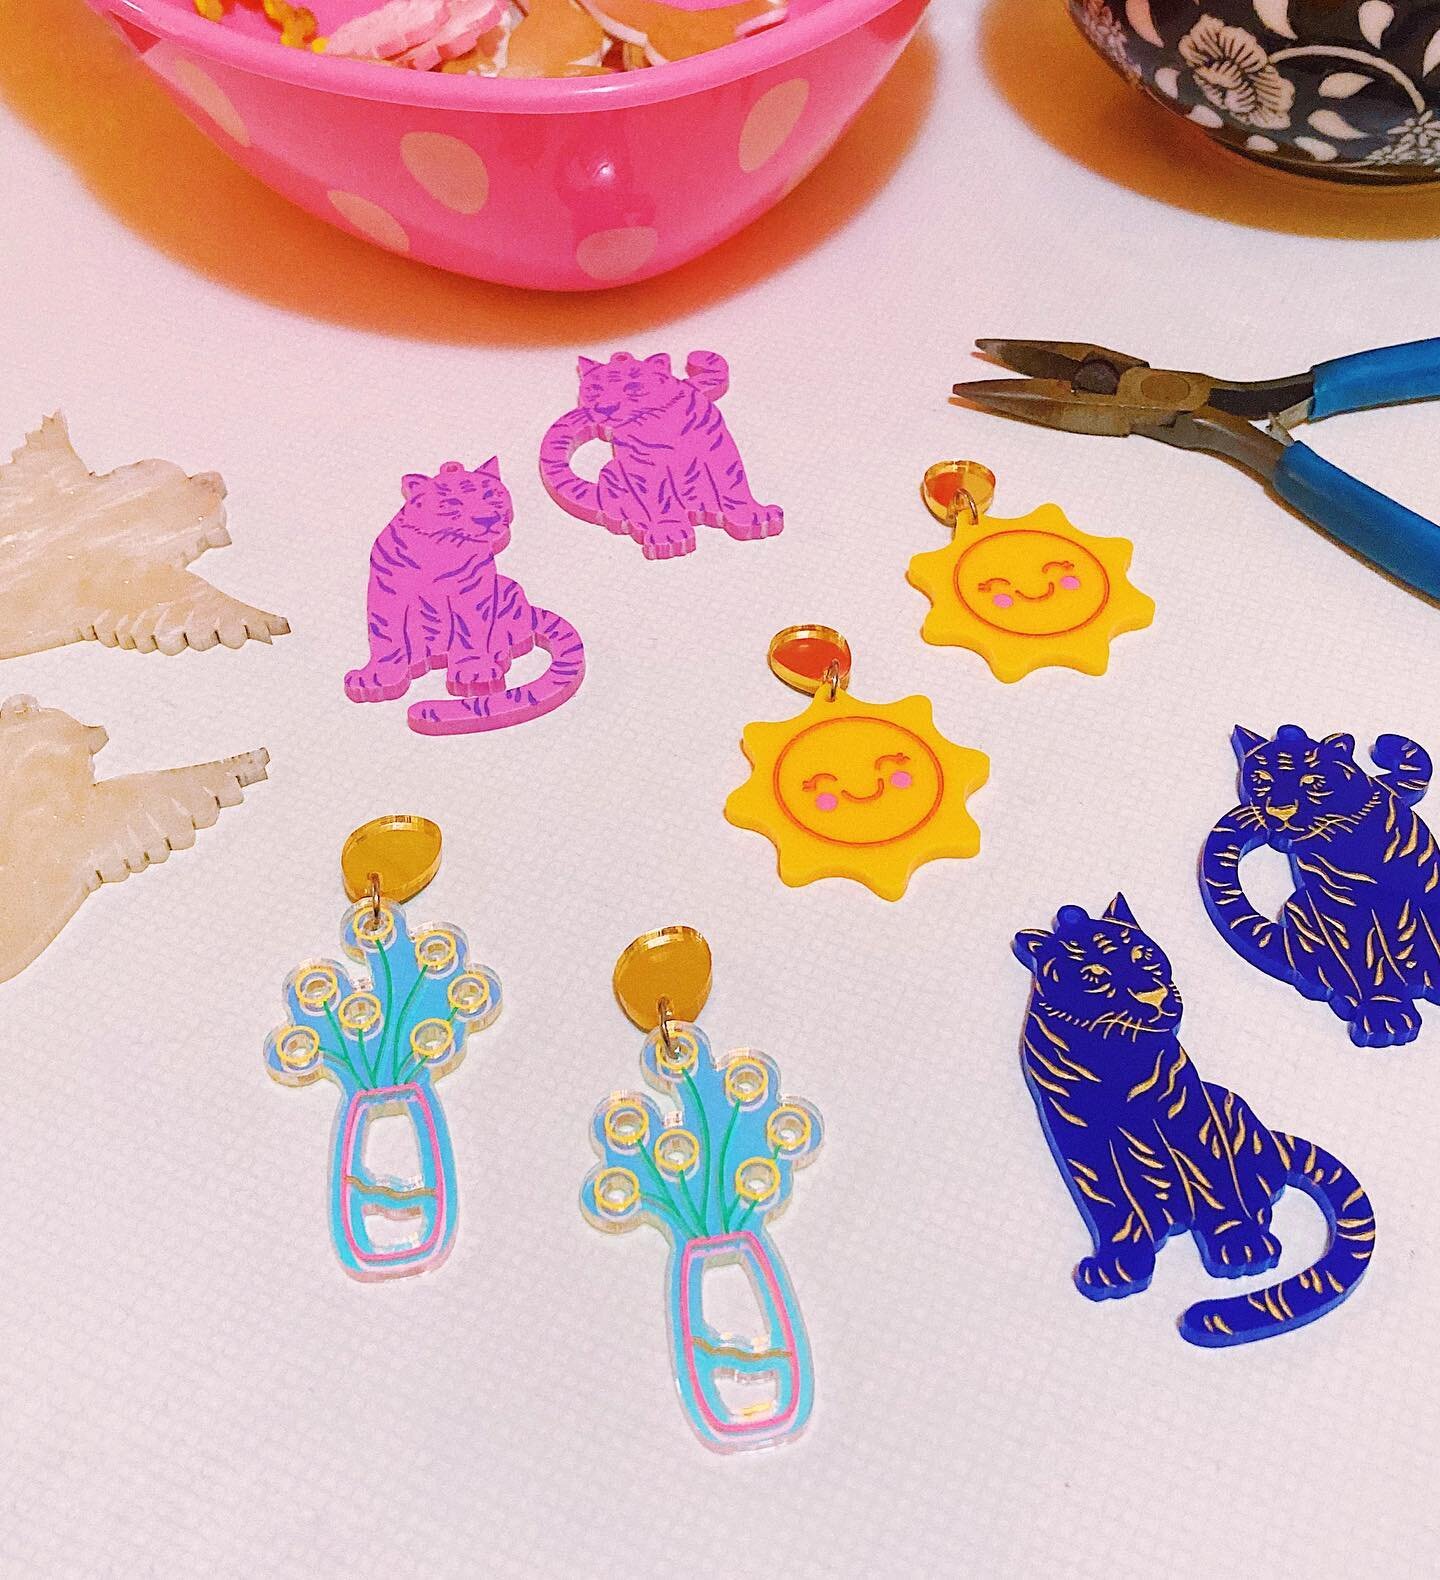 Lots of good things coming 👀✨ did you spot the announcement yesterday? Next shop update is Sept 9 at 7pm aest! 👏 A mix of past designs (I found a whooole lot of awesome things while rummaging through my stash of spare acrylic pieces!) and as always